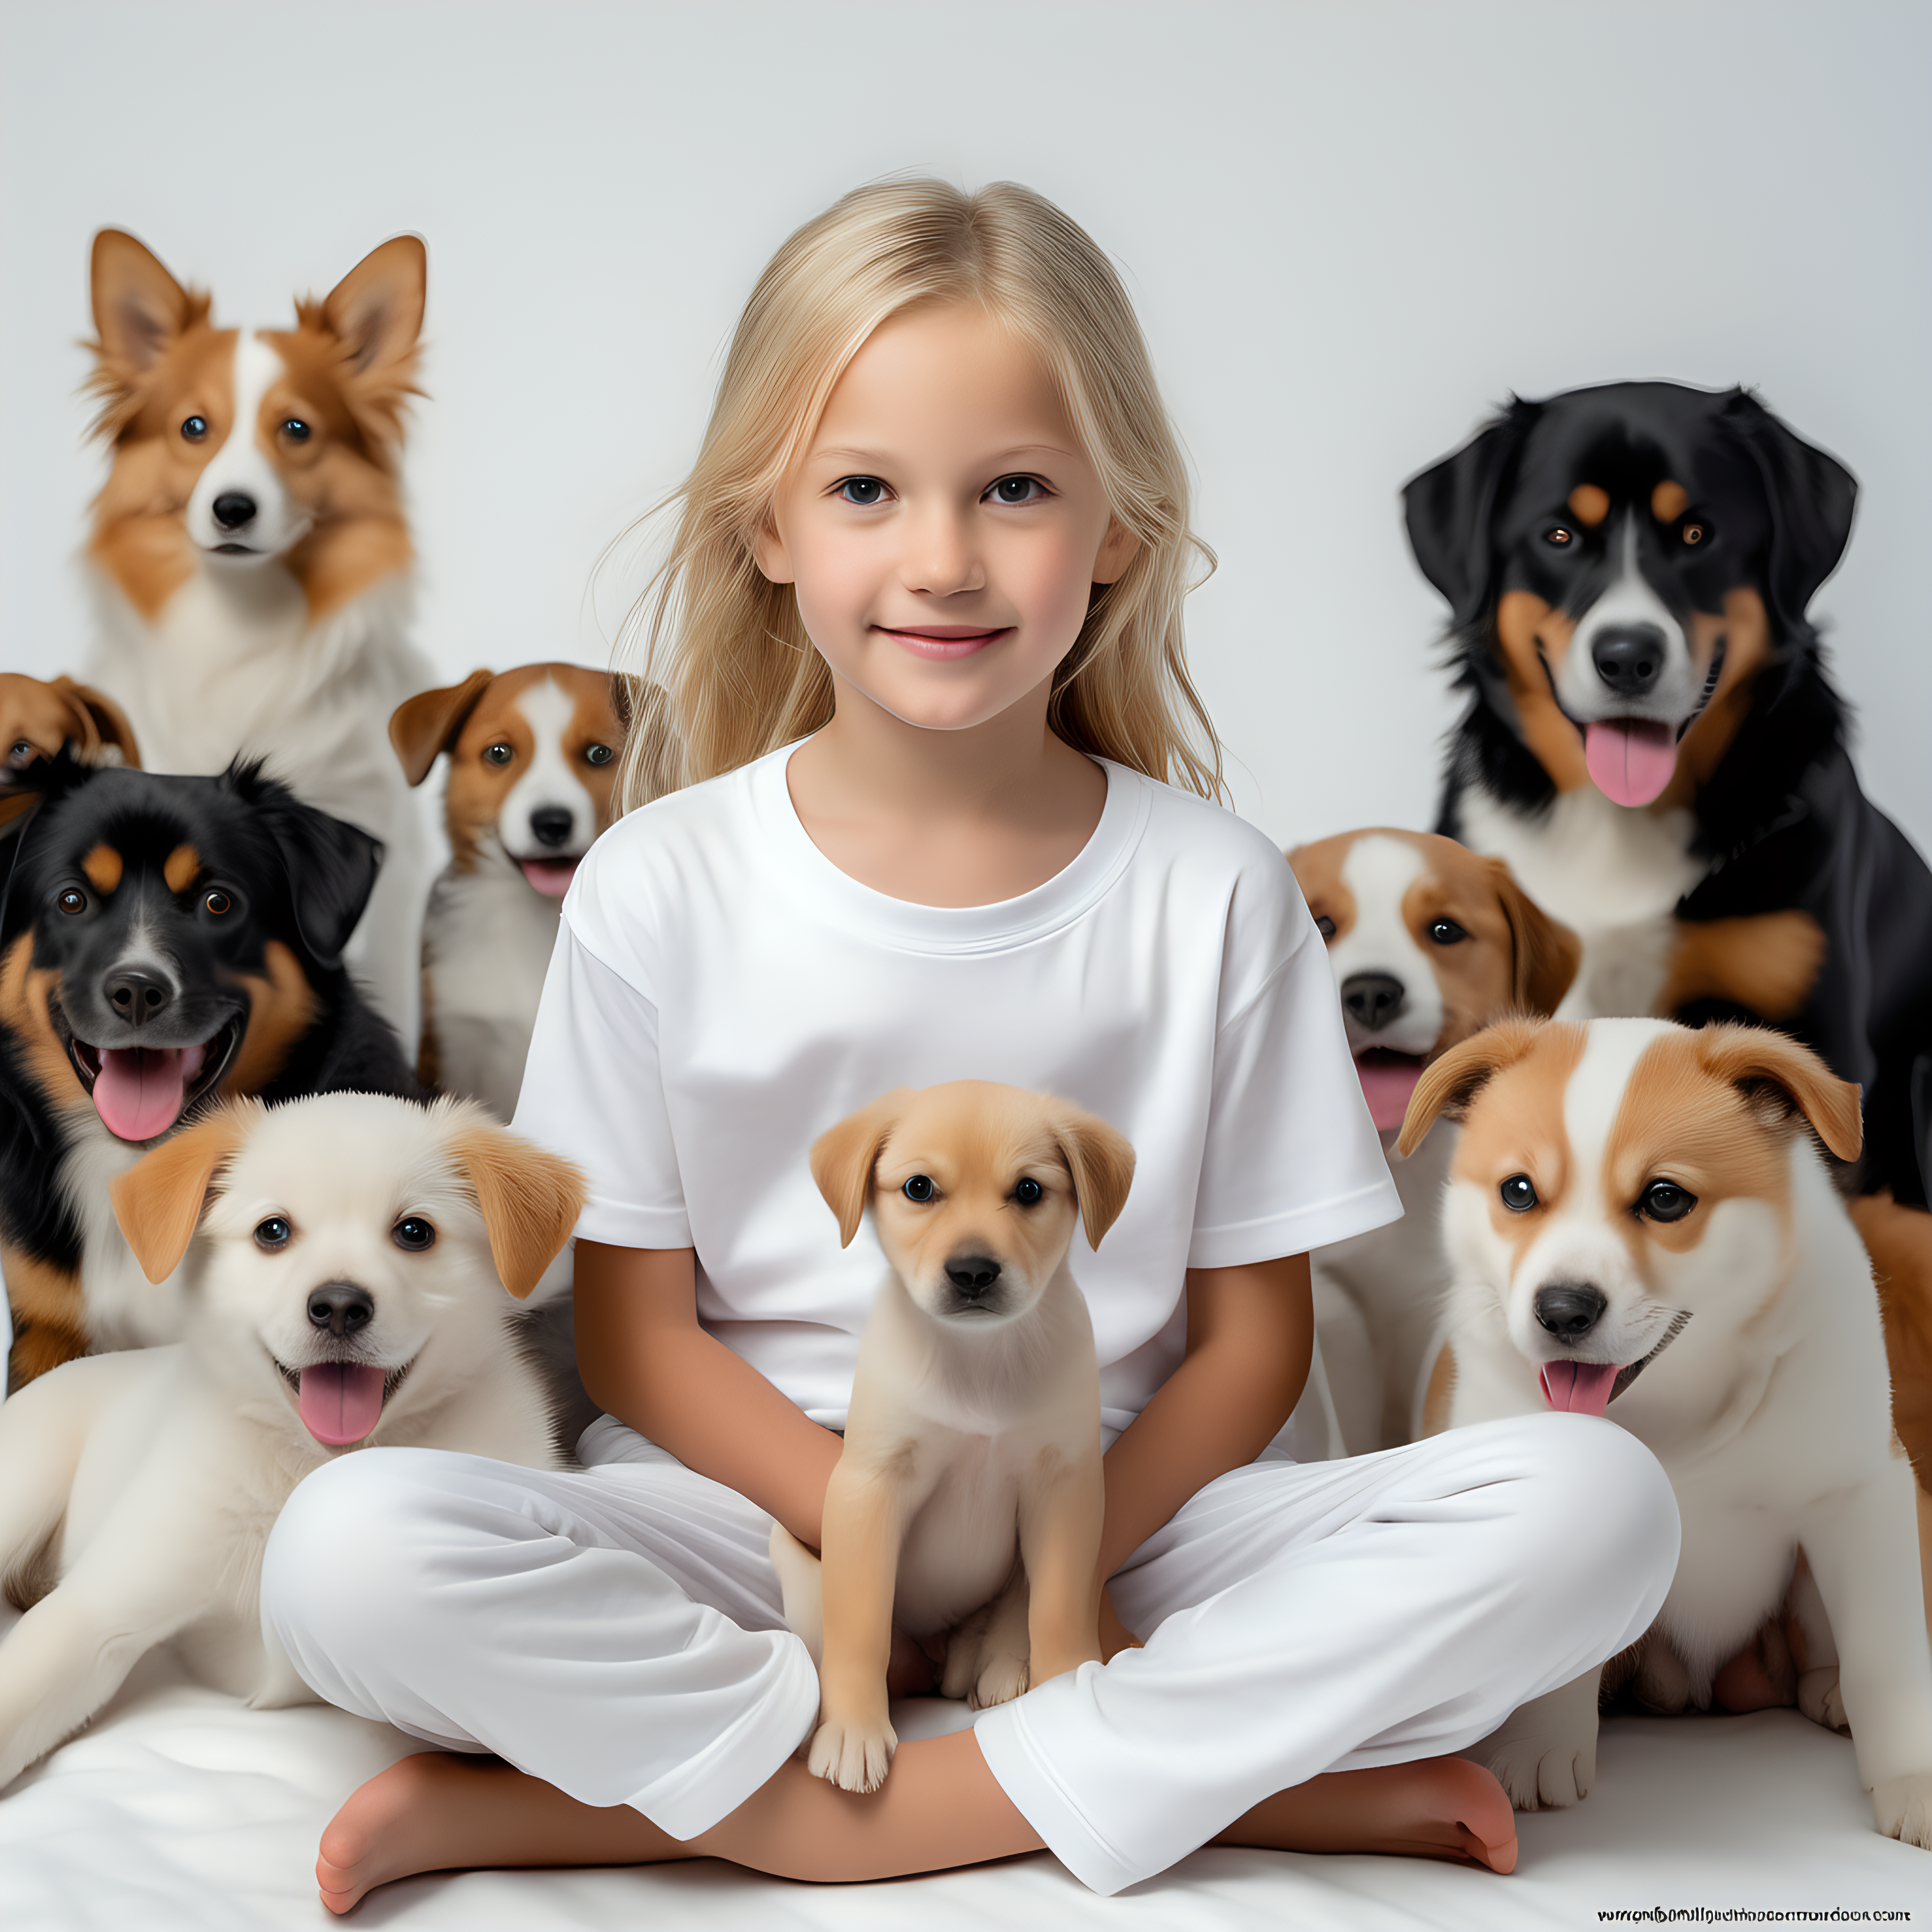 “Perfect Facial Features photo of a blonde 8 year old girl sitting playing with a dog in  white cotton tshirt pyjama with no print, long  tight cuff sleeves, loose long pants) ,surrounded by many different dogs, no background, hyper realistic, ideal face template, HD, happy, Fujifilm X-T3, 1/1250sec at f/2.8, ISO 160, 84mm”